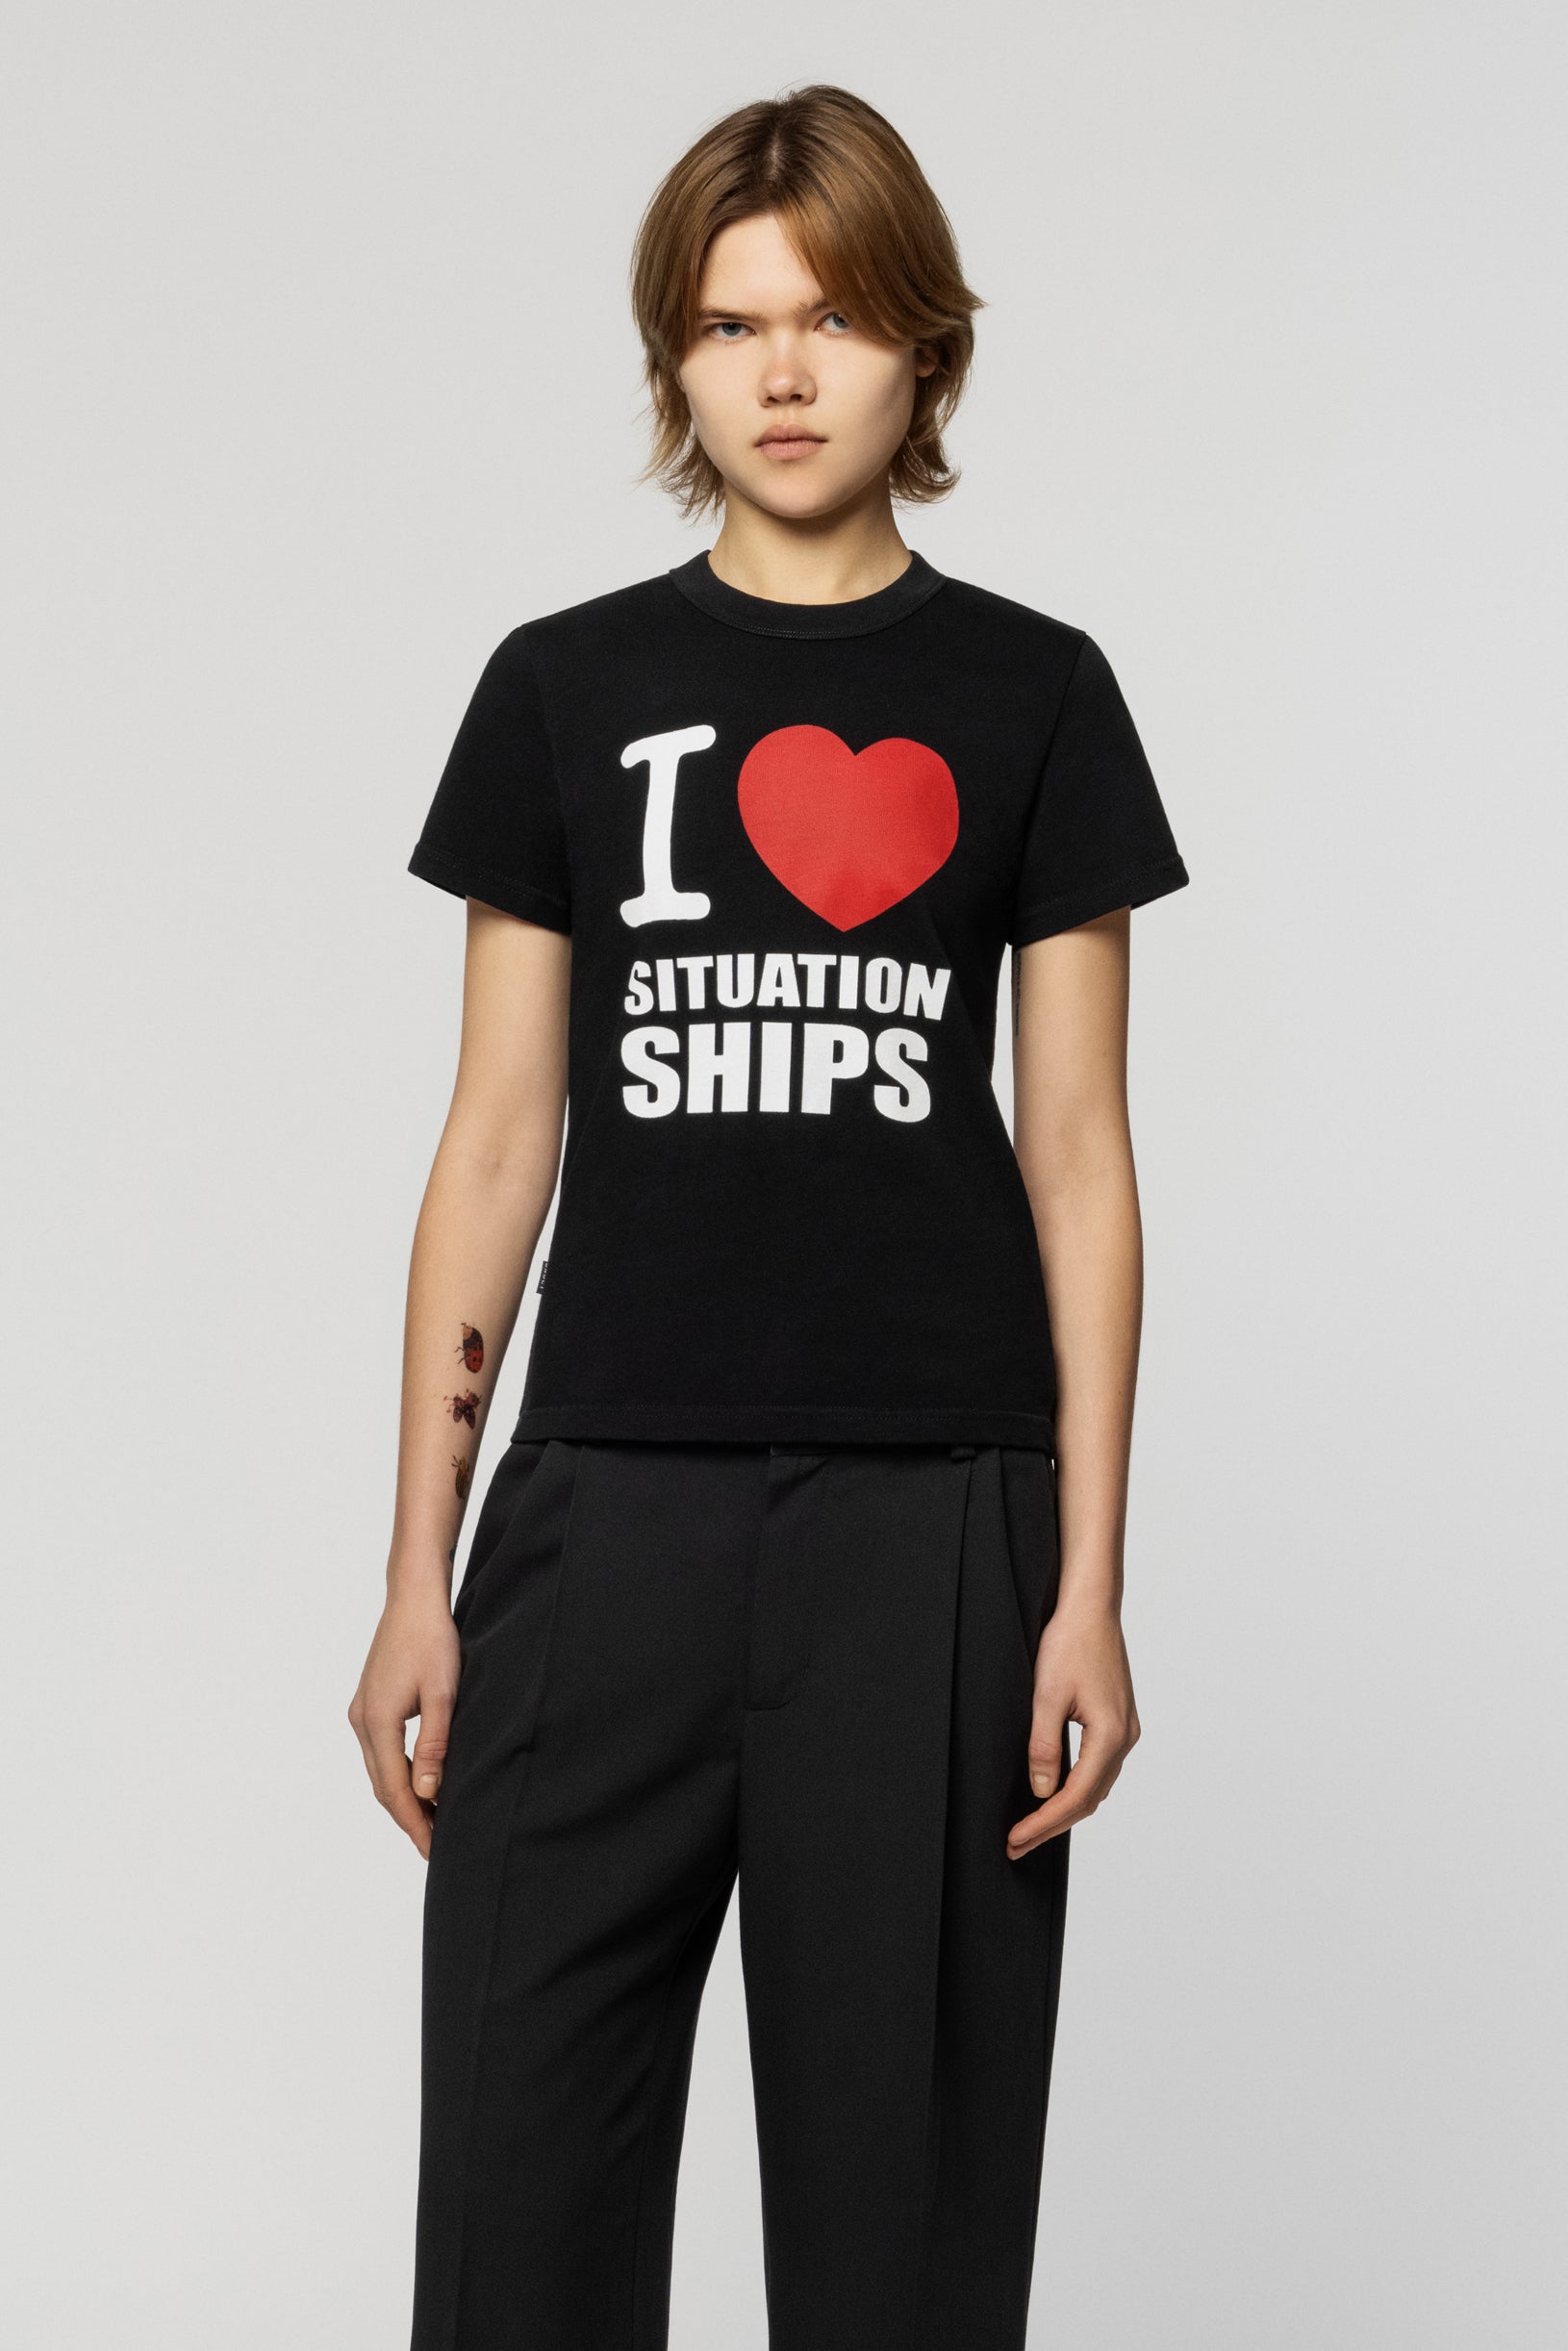 Situationships Baby T-shirt Black